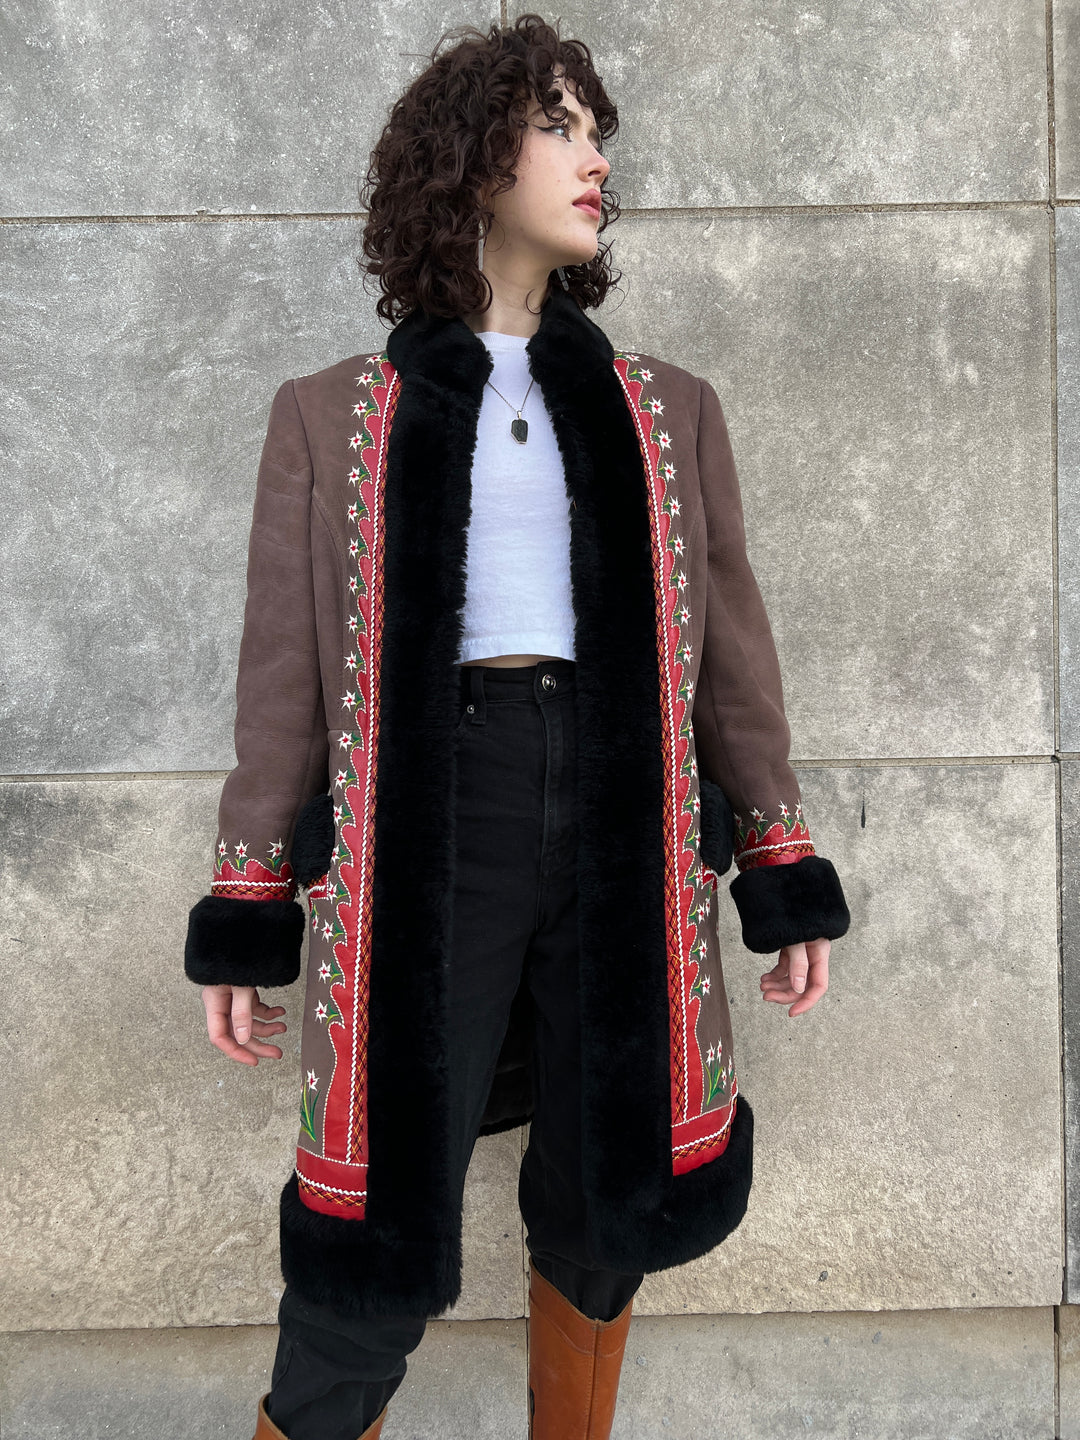 60s Mocha Brown Suede Shearling Penny Lane Style Coat, Leather and Embroidered Detail